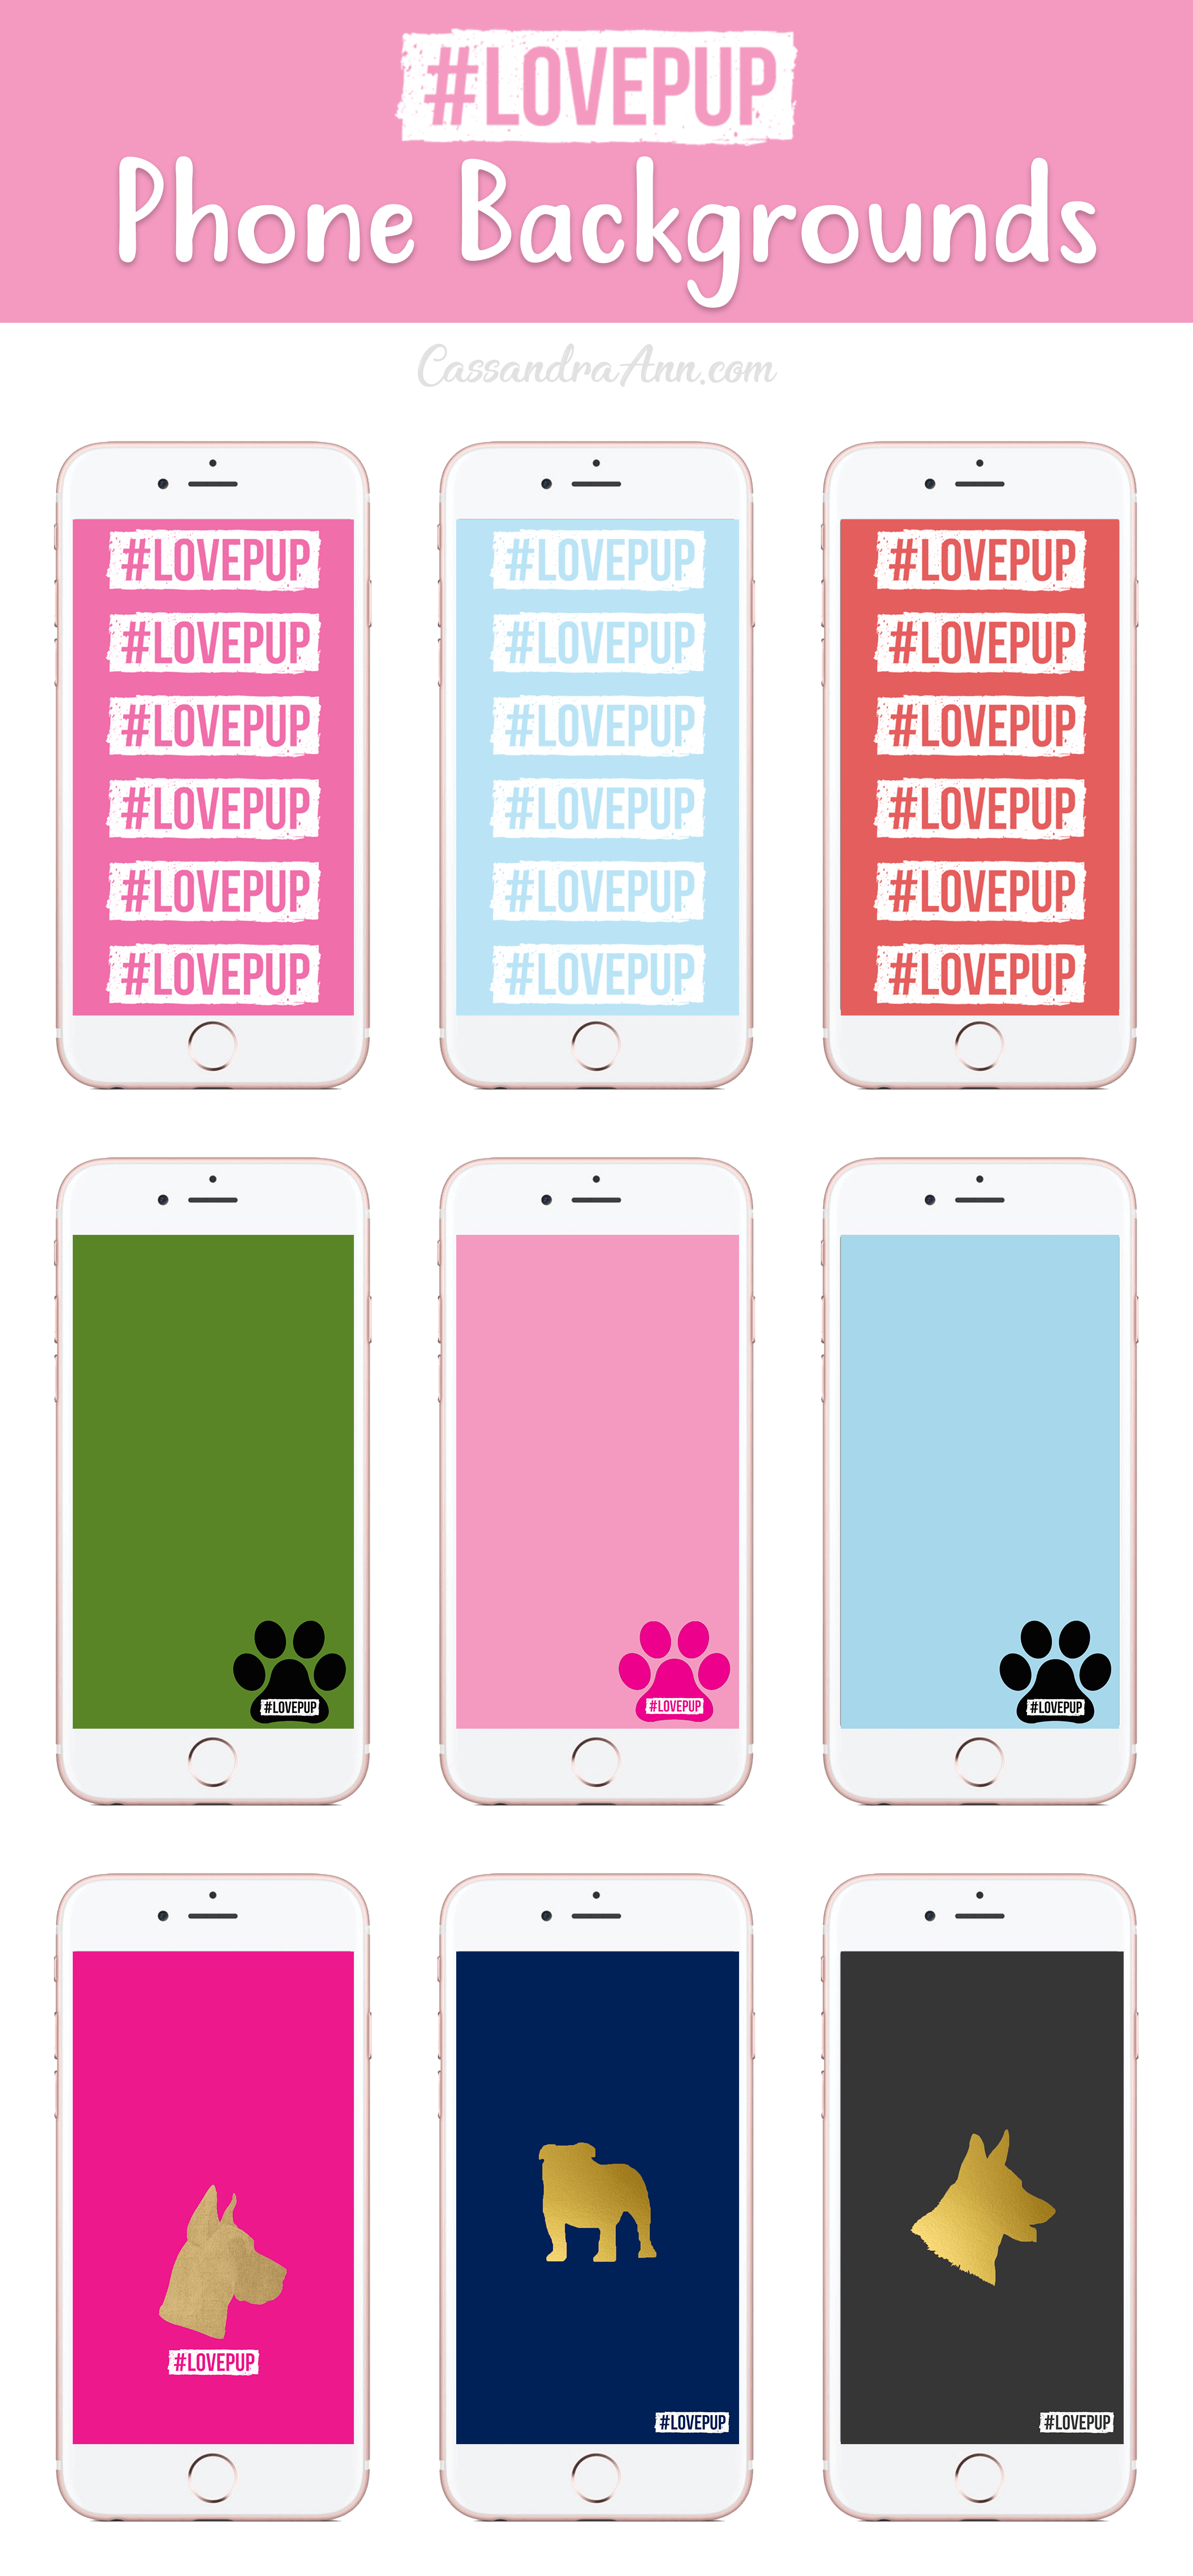 Spread Kindness with #LovePup (Free Phone Background). Blog